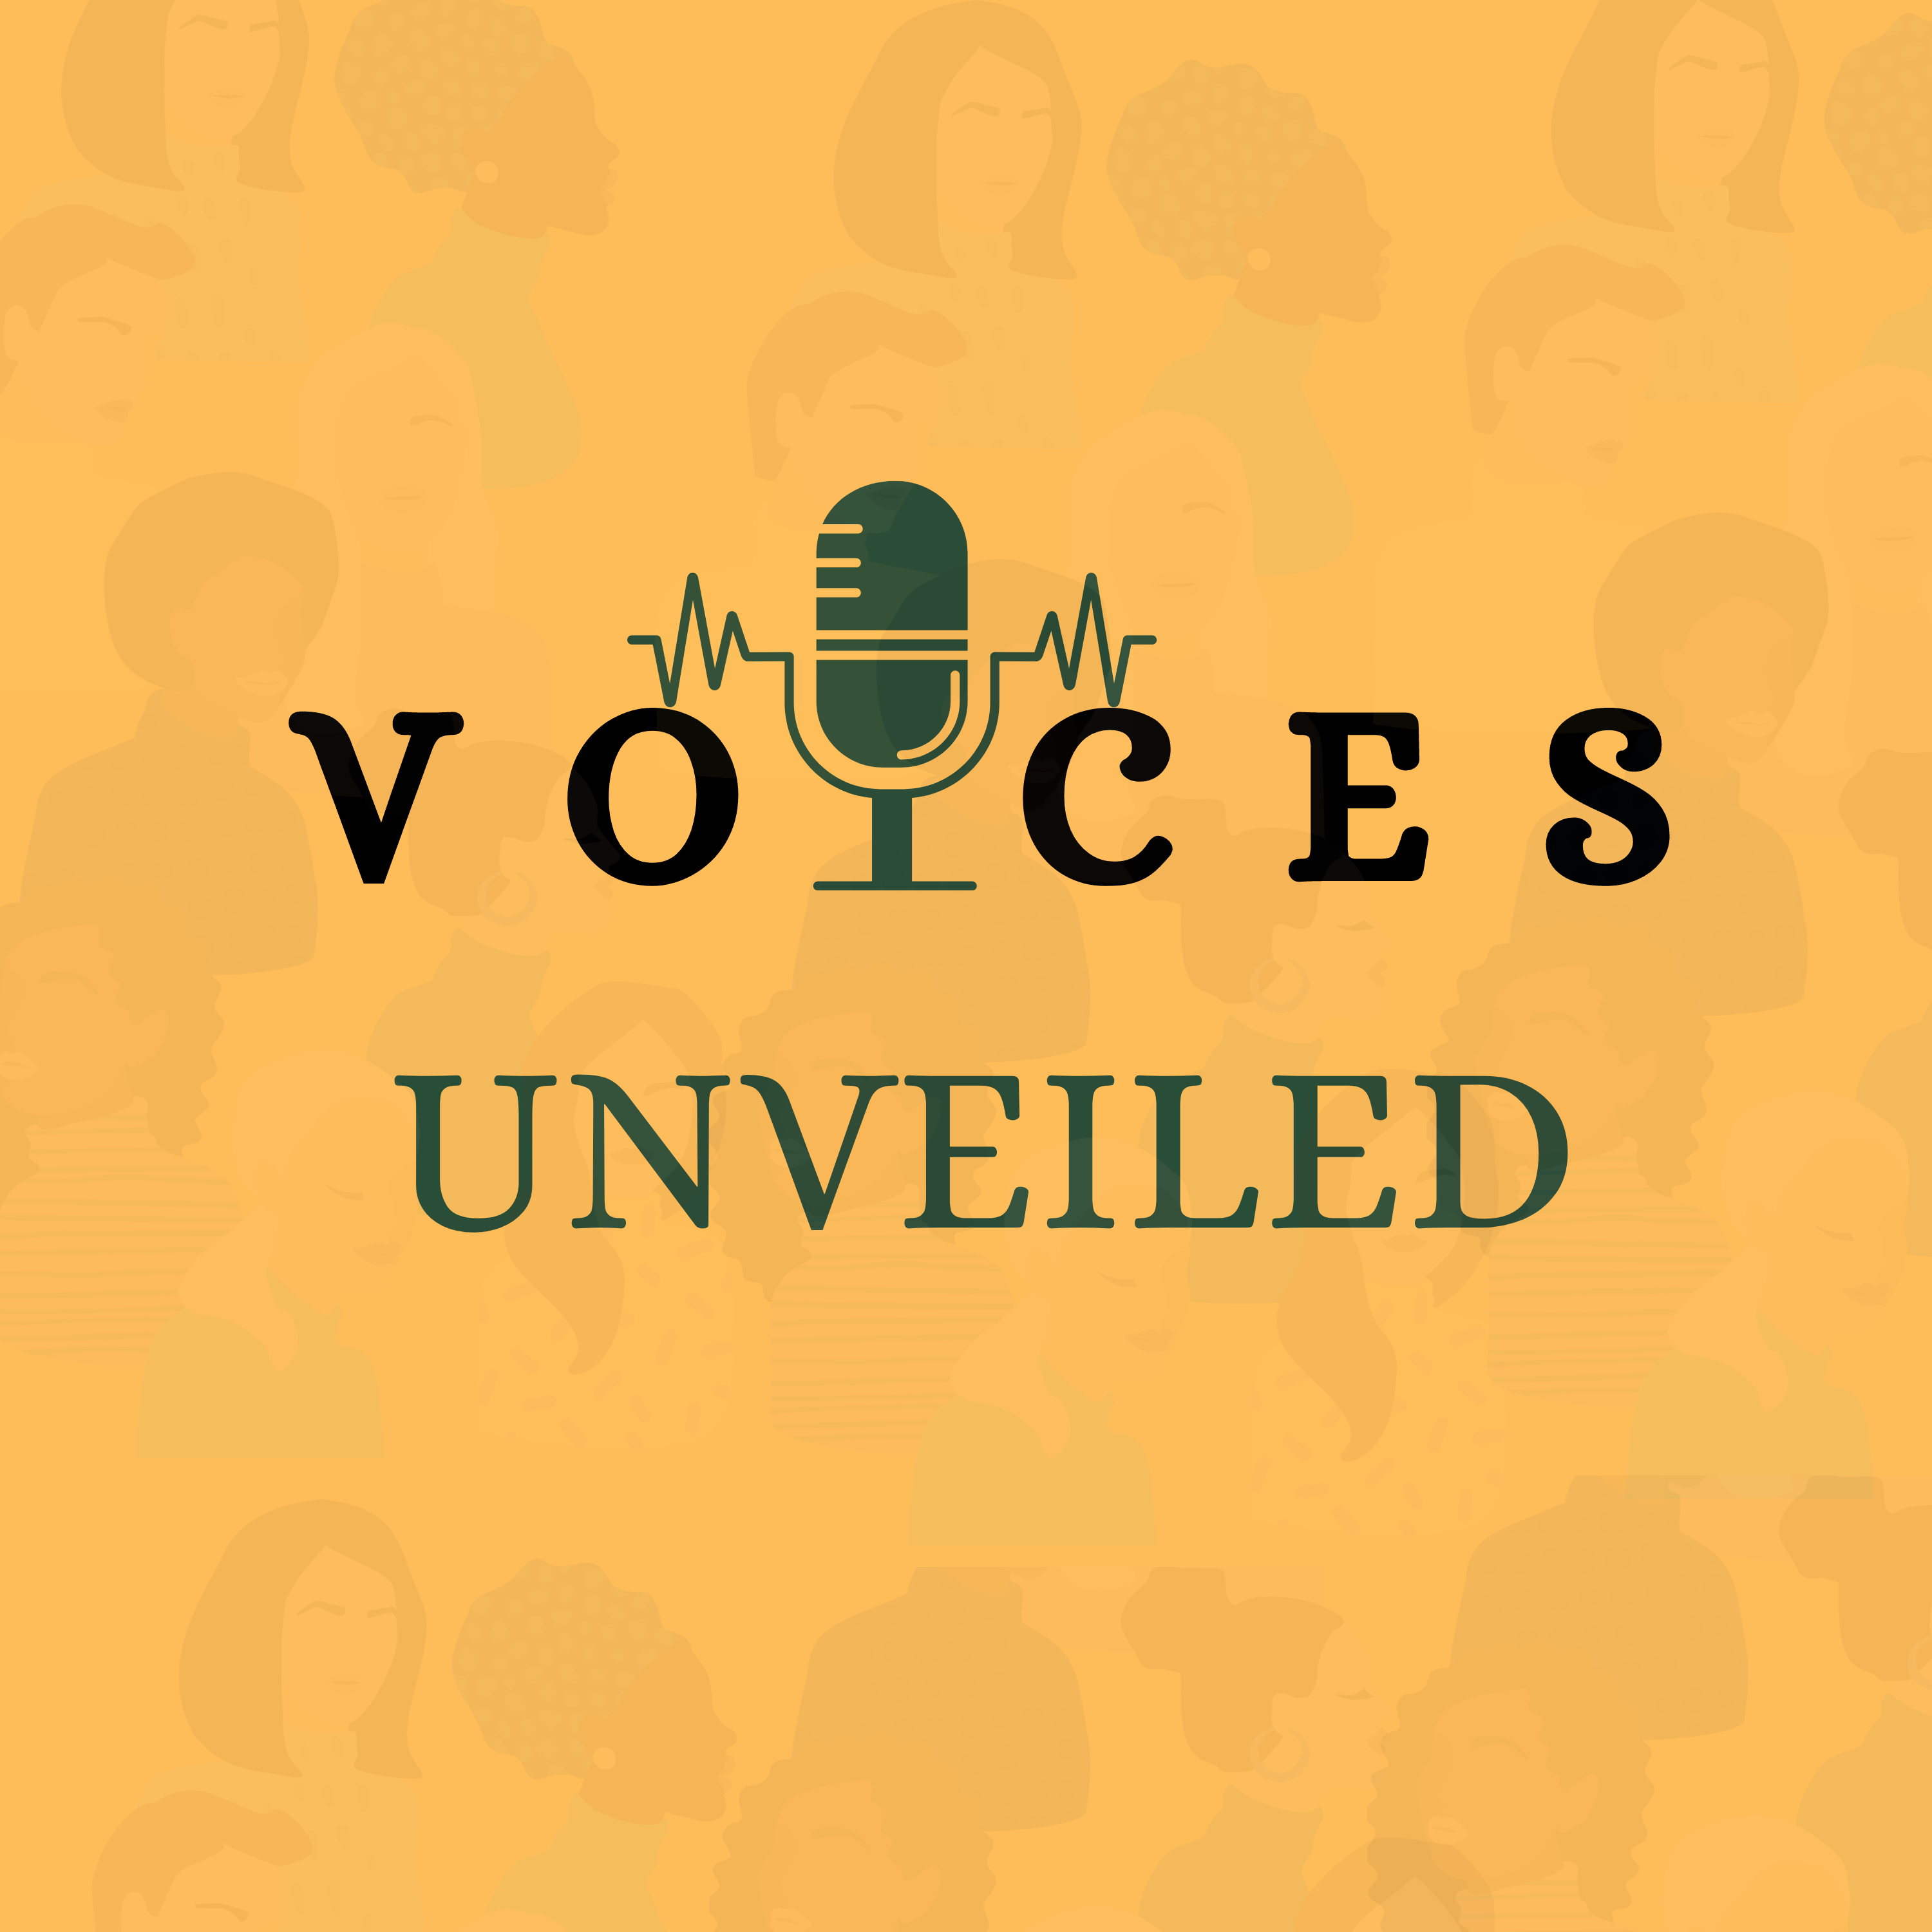 Voices Unveiled: Opportunity Knocks When You Need It